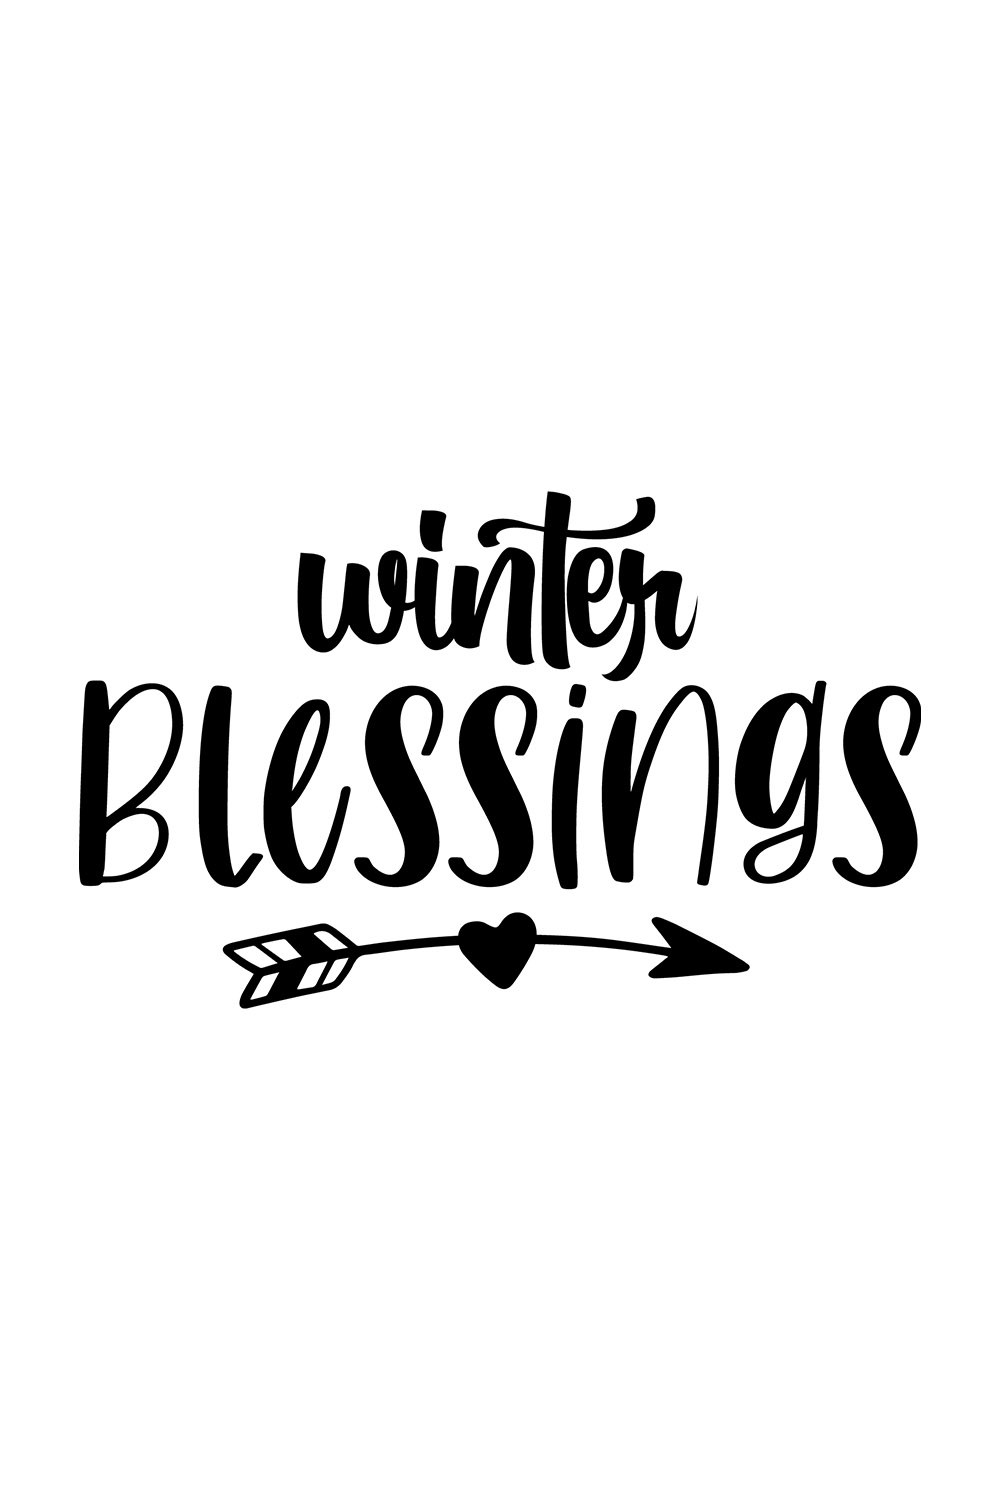 Image with charming black lettering for Winter Blessings prints.